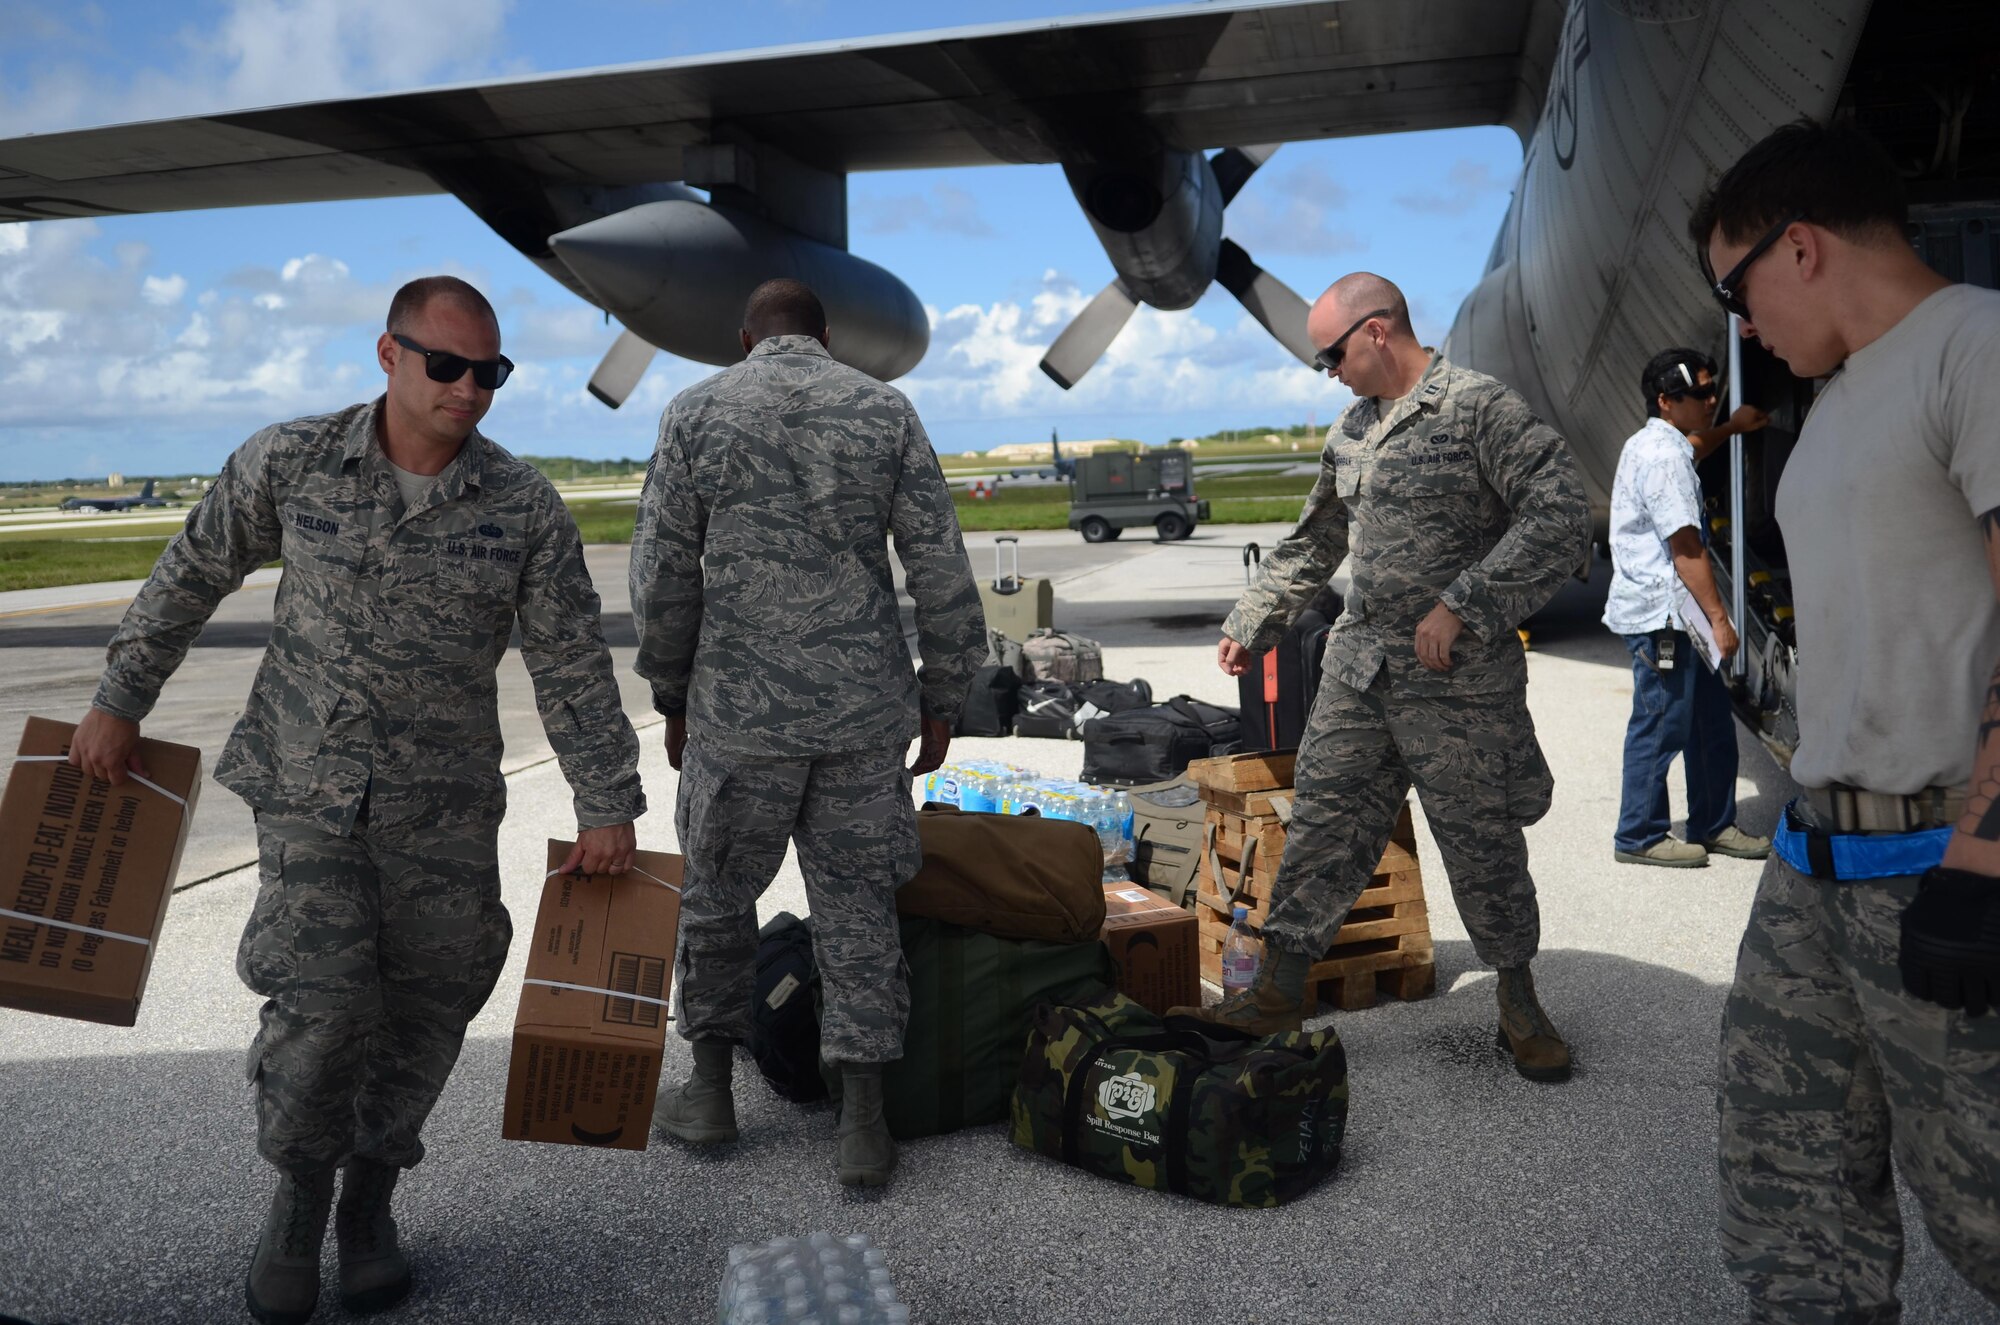 Airmen from the 36th Contingency Response Group load equipment into a C-130 Hercules before departing to support Operation Damayan in Tacloban, Philippines Nov. 14, 2013, at Andersen Air Force Base, Guam.  Air Force Emergency Management is using National Preparedness Month this September to encourage Airmen and their families to “Be Ready!” (U.S. Air Force photo/Senior Airman Marianique Santos)